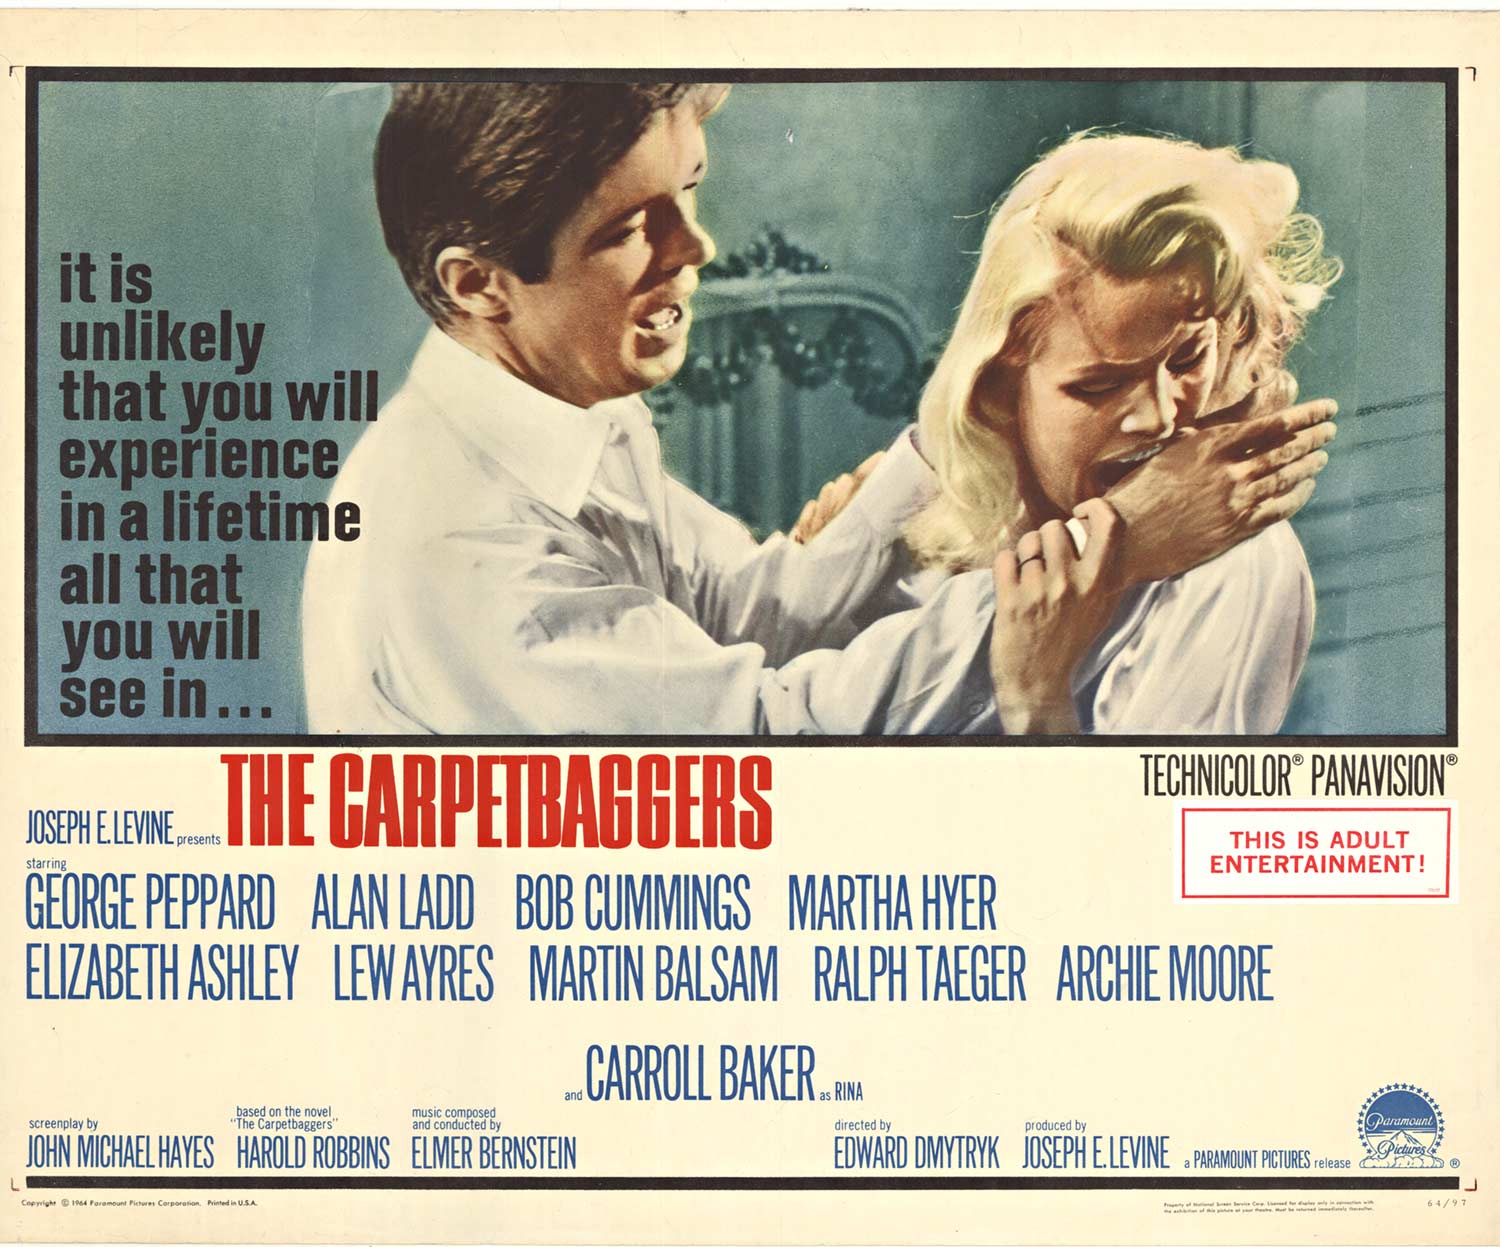 Original movie poster: "The Carpetbaggers" (Paramount, 1964). Half Sheet (22" X 28"). Drama. Directed by Edward Dmytryk. Starring George Peppard, Alan Ladd, Bob Cummings, Martha Hyer, Carroll Baker and Elizabeth Ashley. <br> NSS: 64/97 <br>This poster